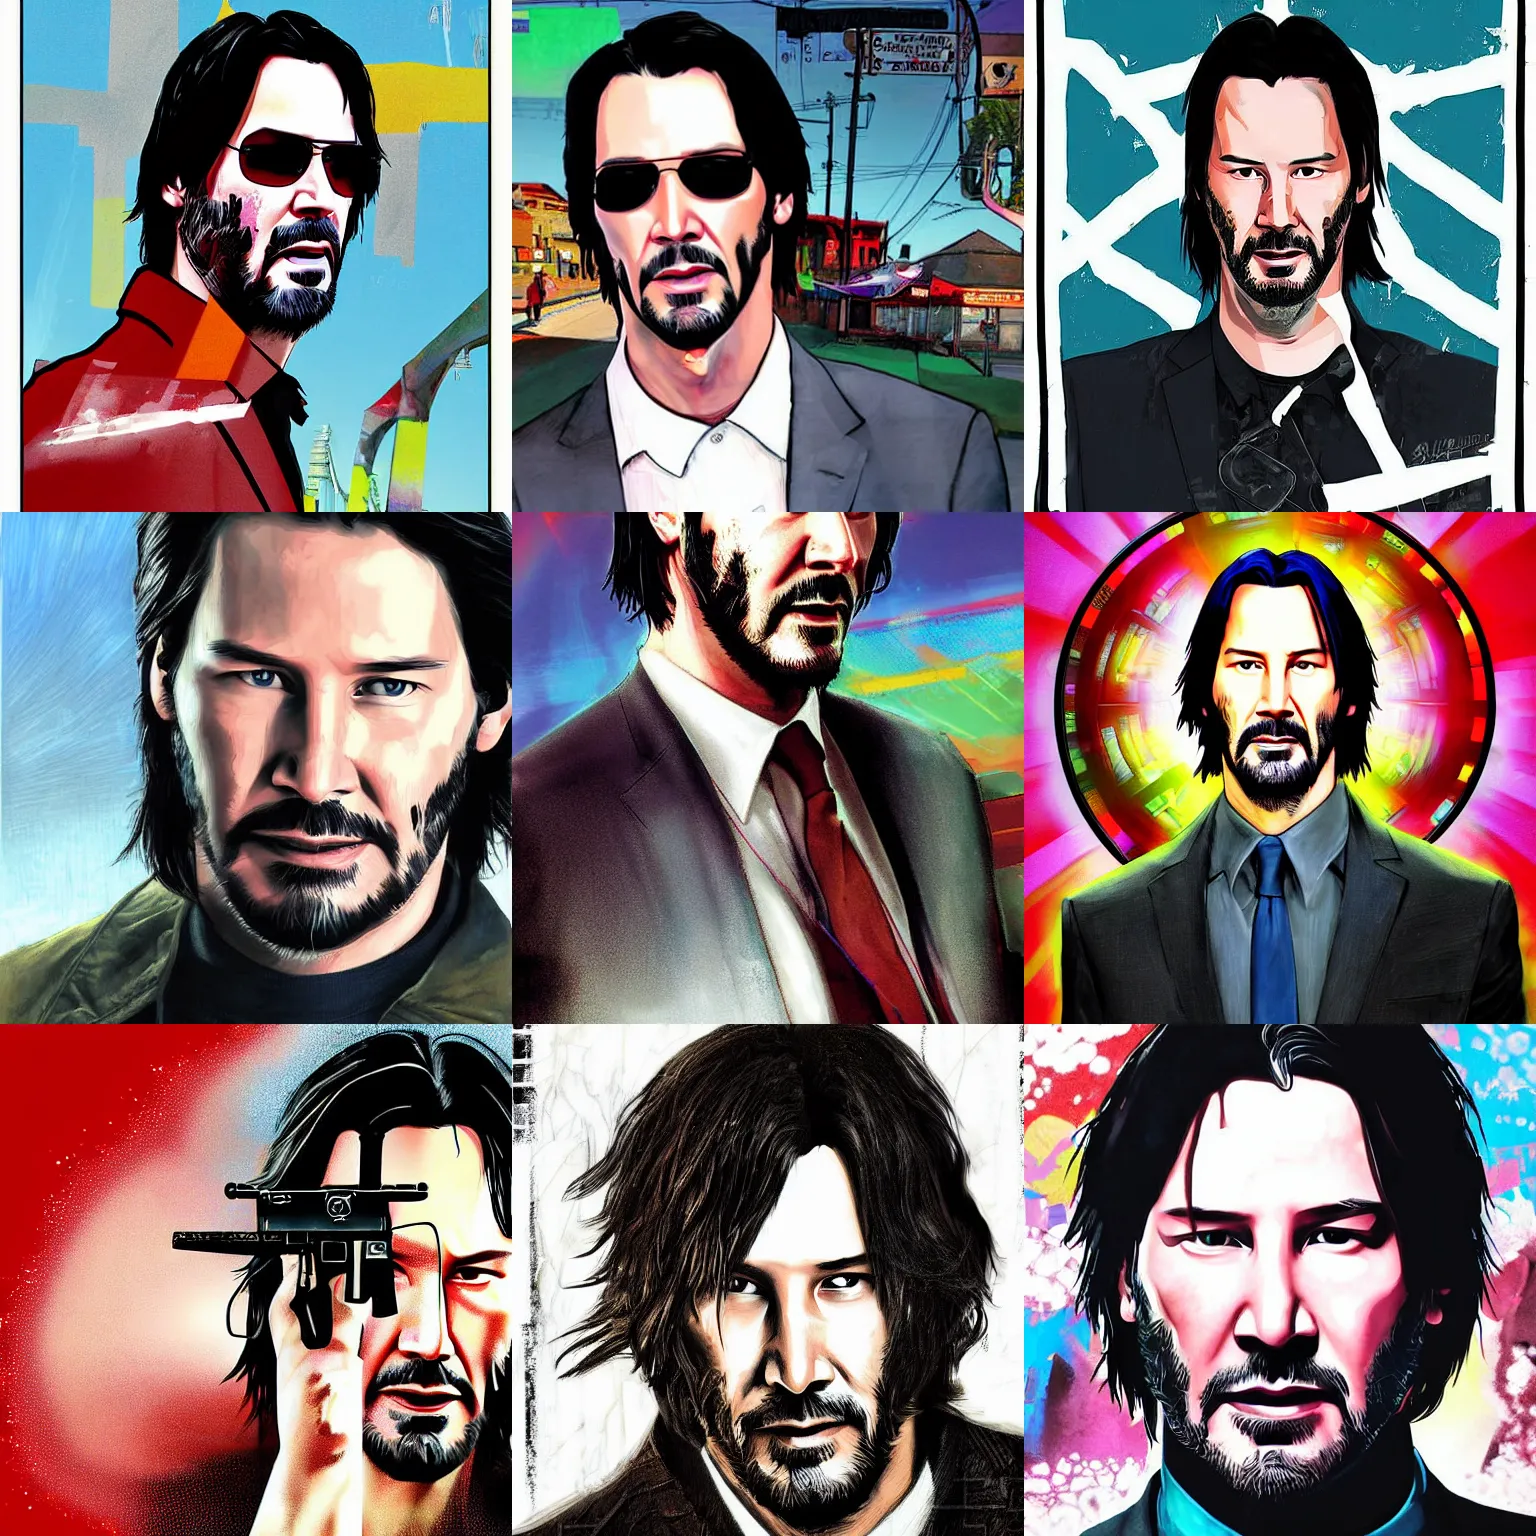 Prompt: Keanu Reeves art by Stephen Bliss, GTA V cover art